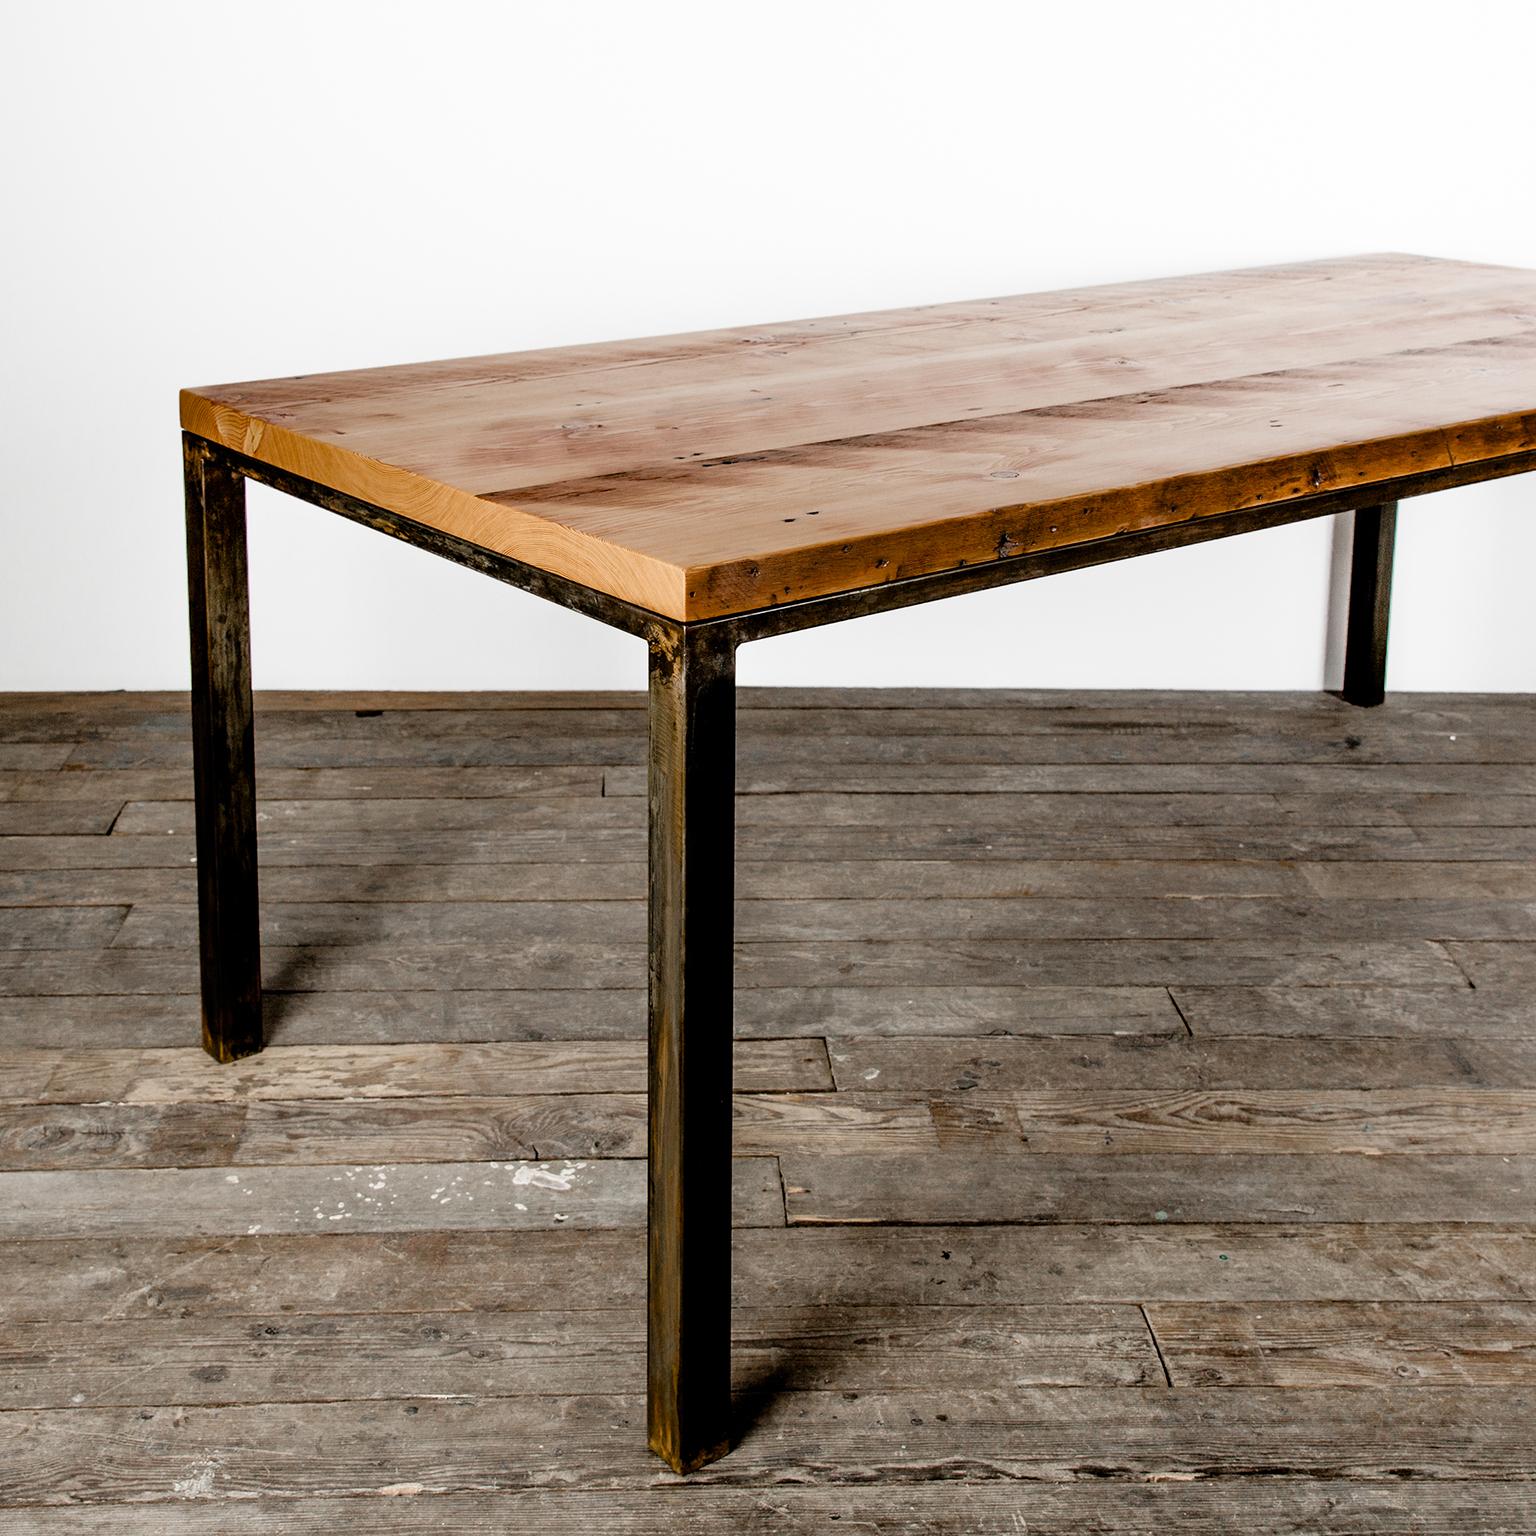 Our workshop table is modeled after the simple utilitarian design of an original workbench. Semi-ground welds and intentional machine marks are scars of the journey this table has taken to where it is now. Over the course of this table's